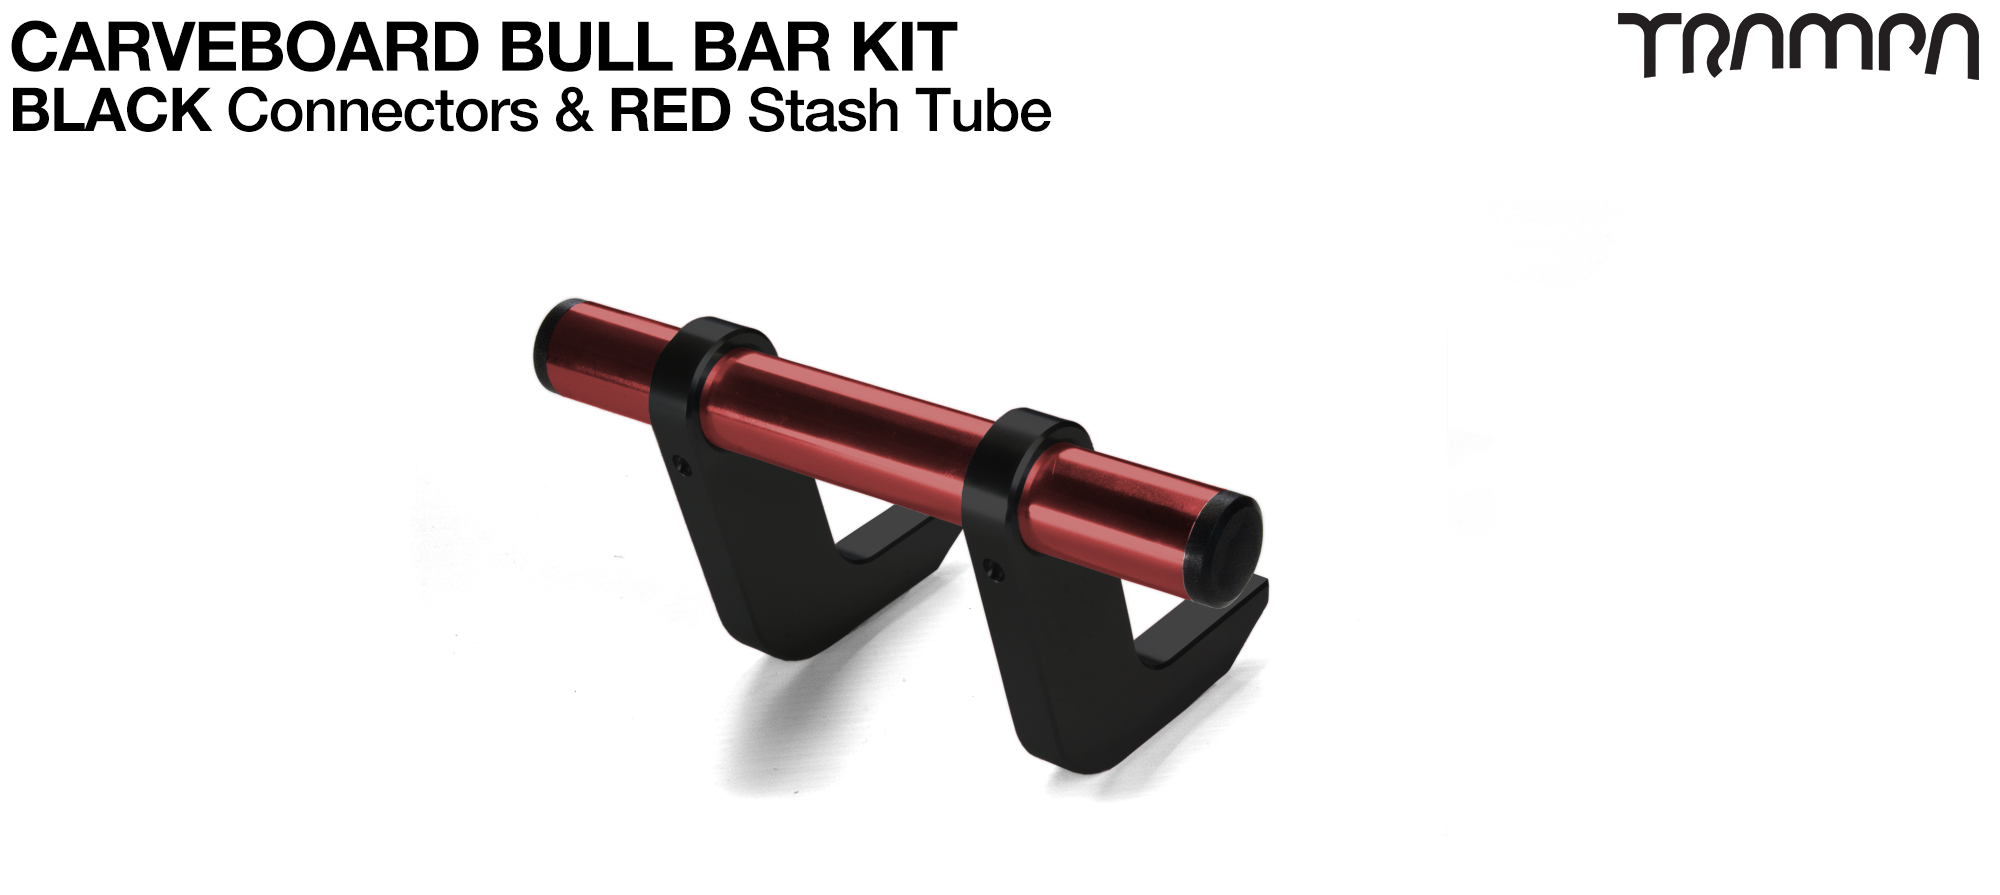 BLACK Uprights & RED Crossbar BULL BARS for CARVE BOARDS using T6 Heat Treated CNC'd AluminIum Clamps, Hollow Aluminium Stash Tubes with Rubber end bungs 